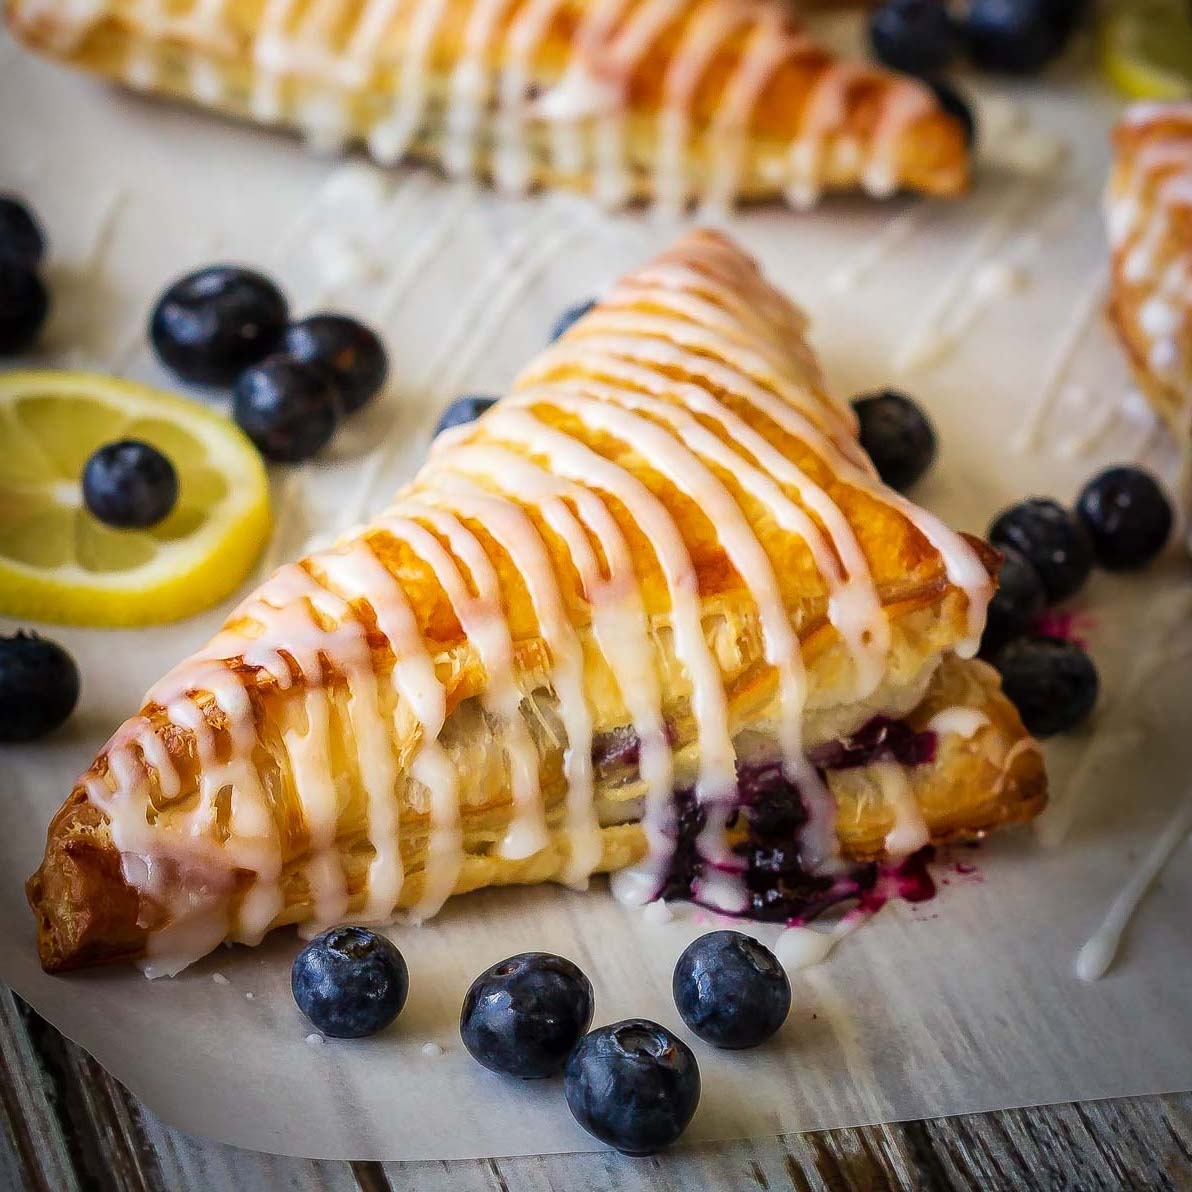 These lemon blueberry turnovers are a fast and easy dessert that everyone will love – the perfect sweet treat for the summer! Get the recipe: bake-eat-repeat.com/lemon-blueberr…